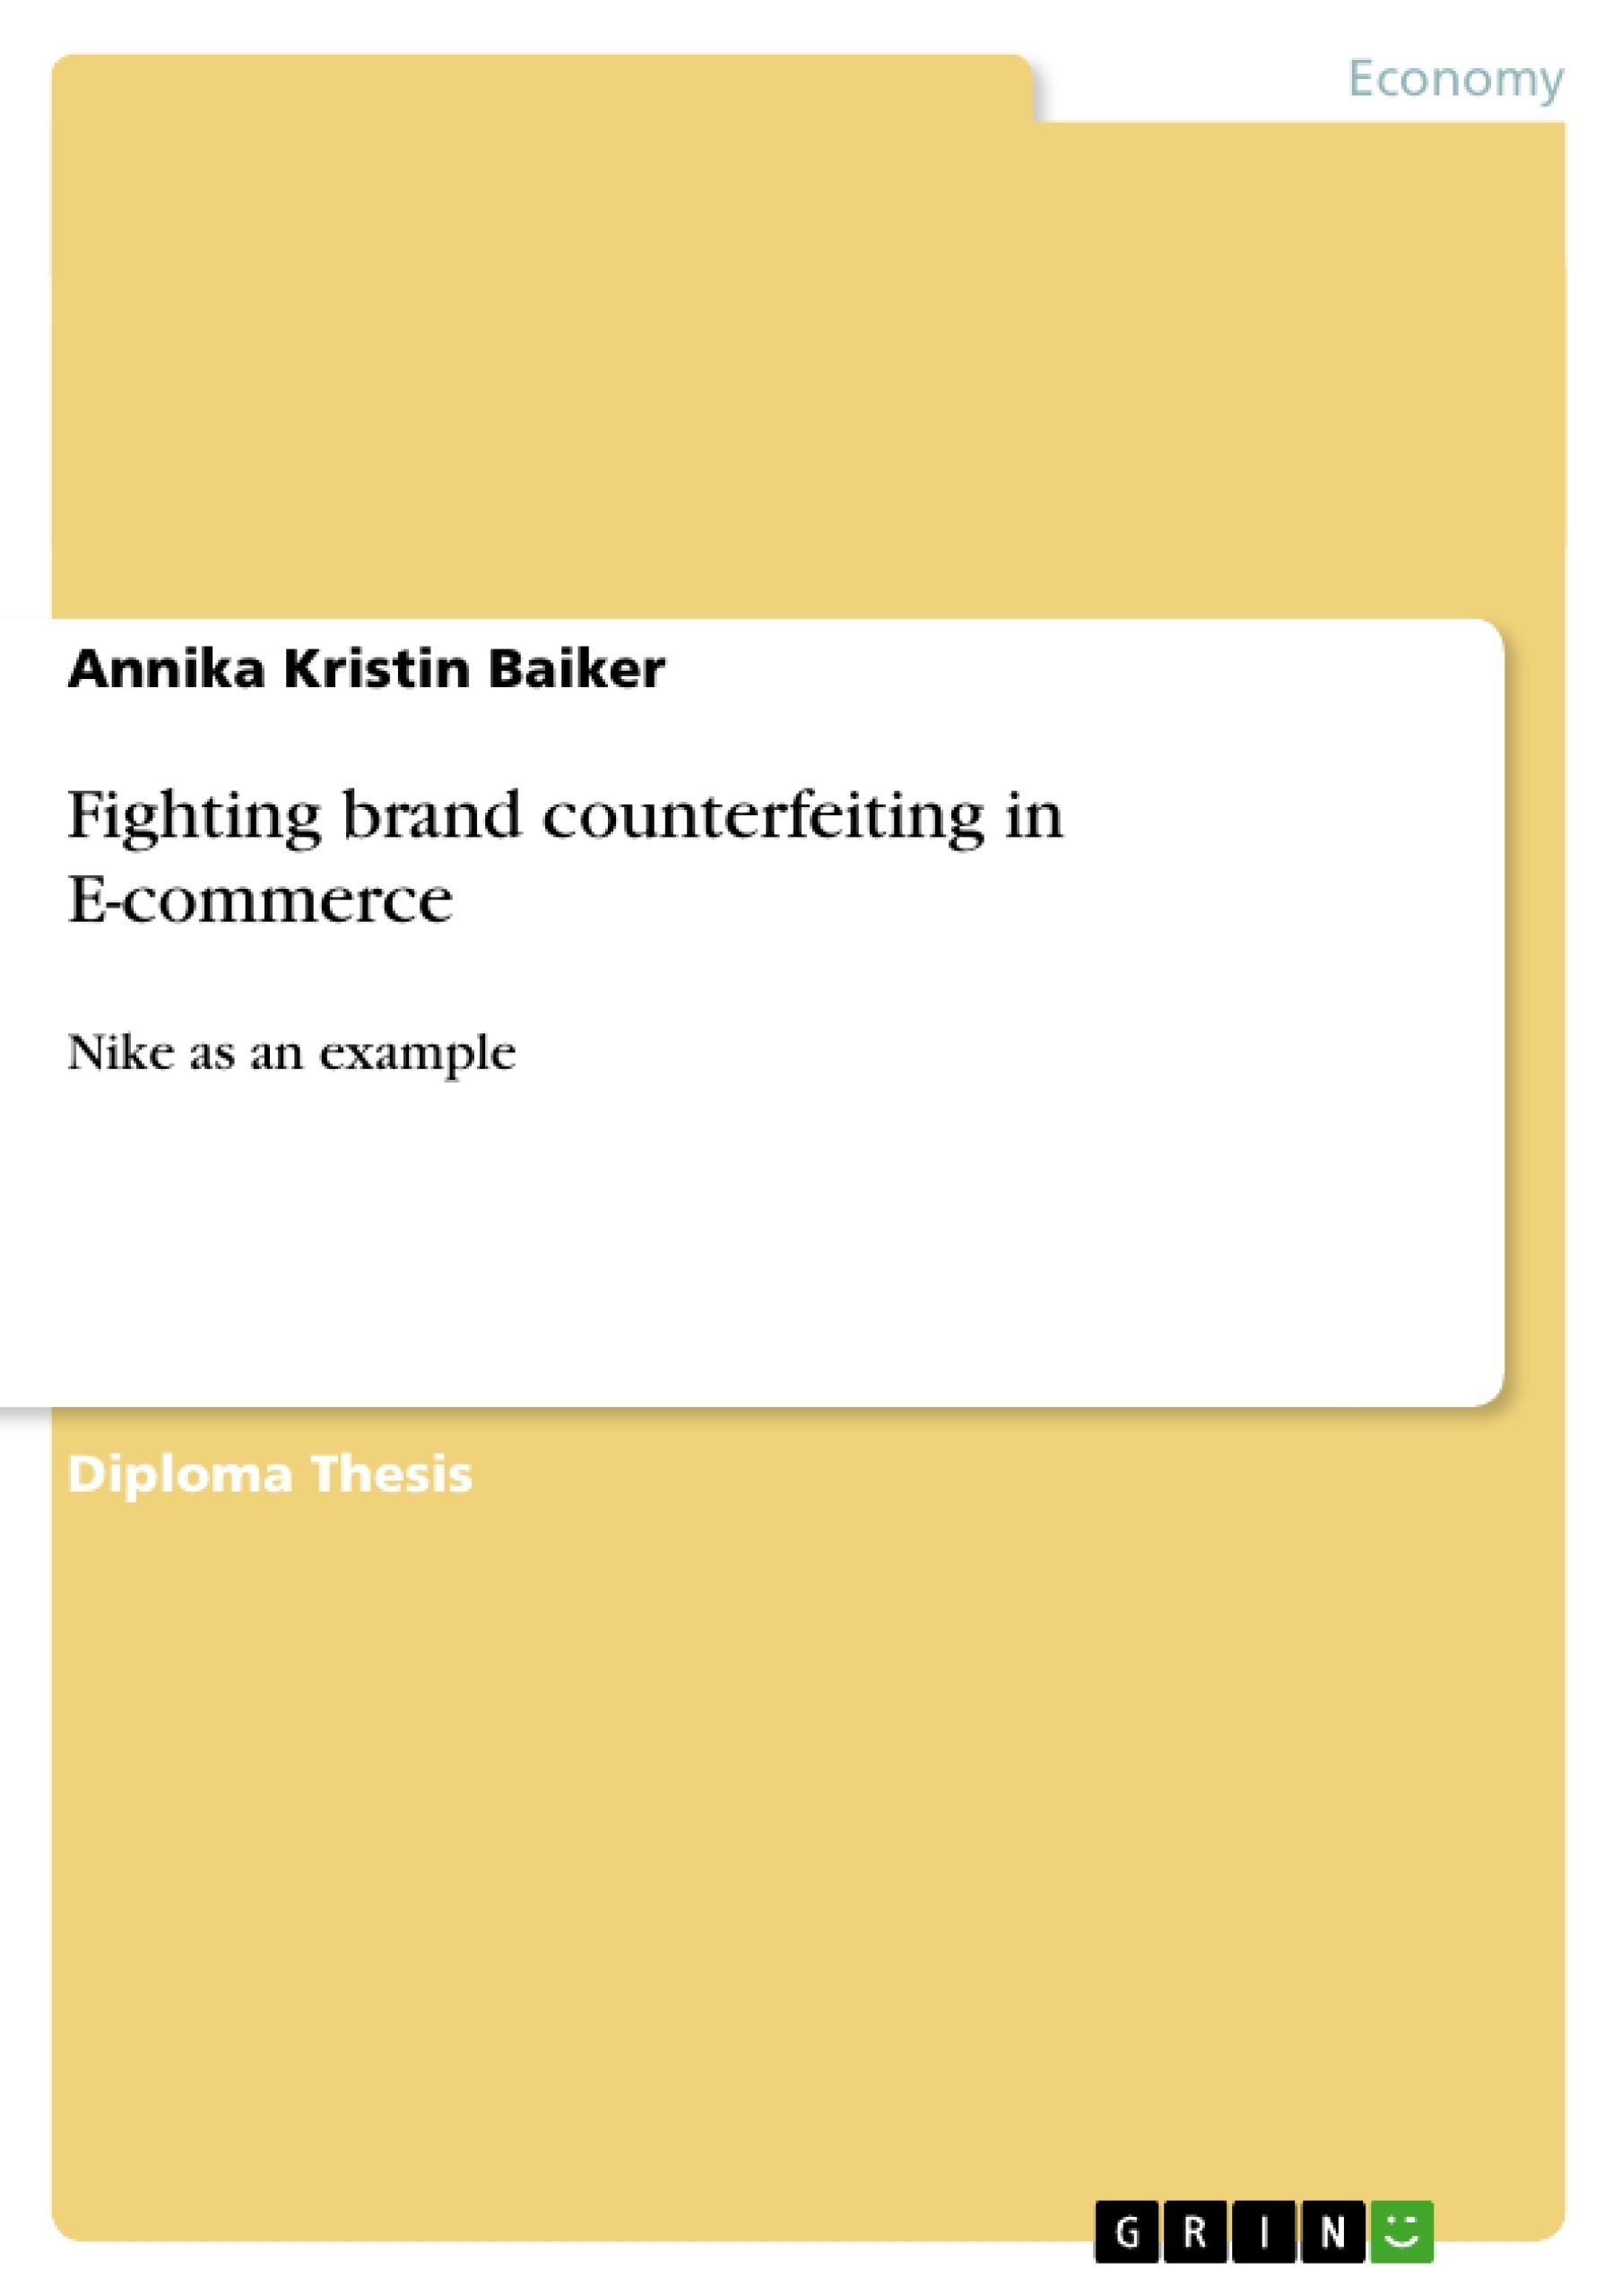 Title: Fighting brand counterfeiting in E-commerce